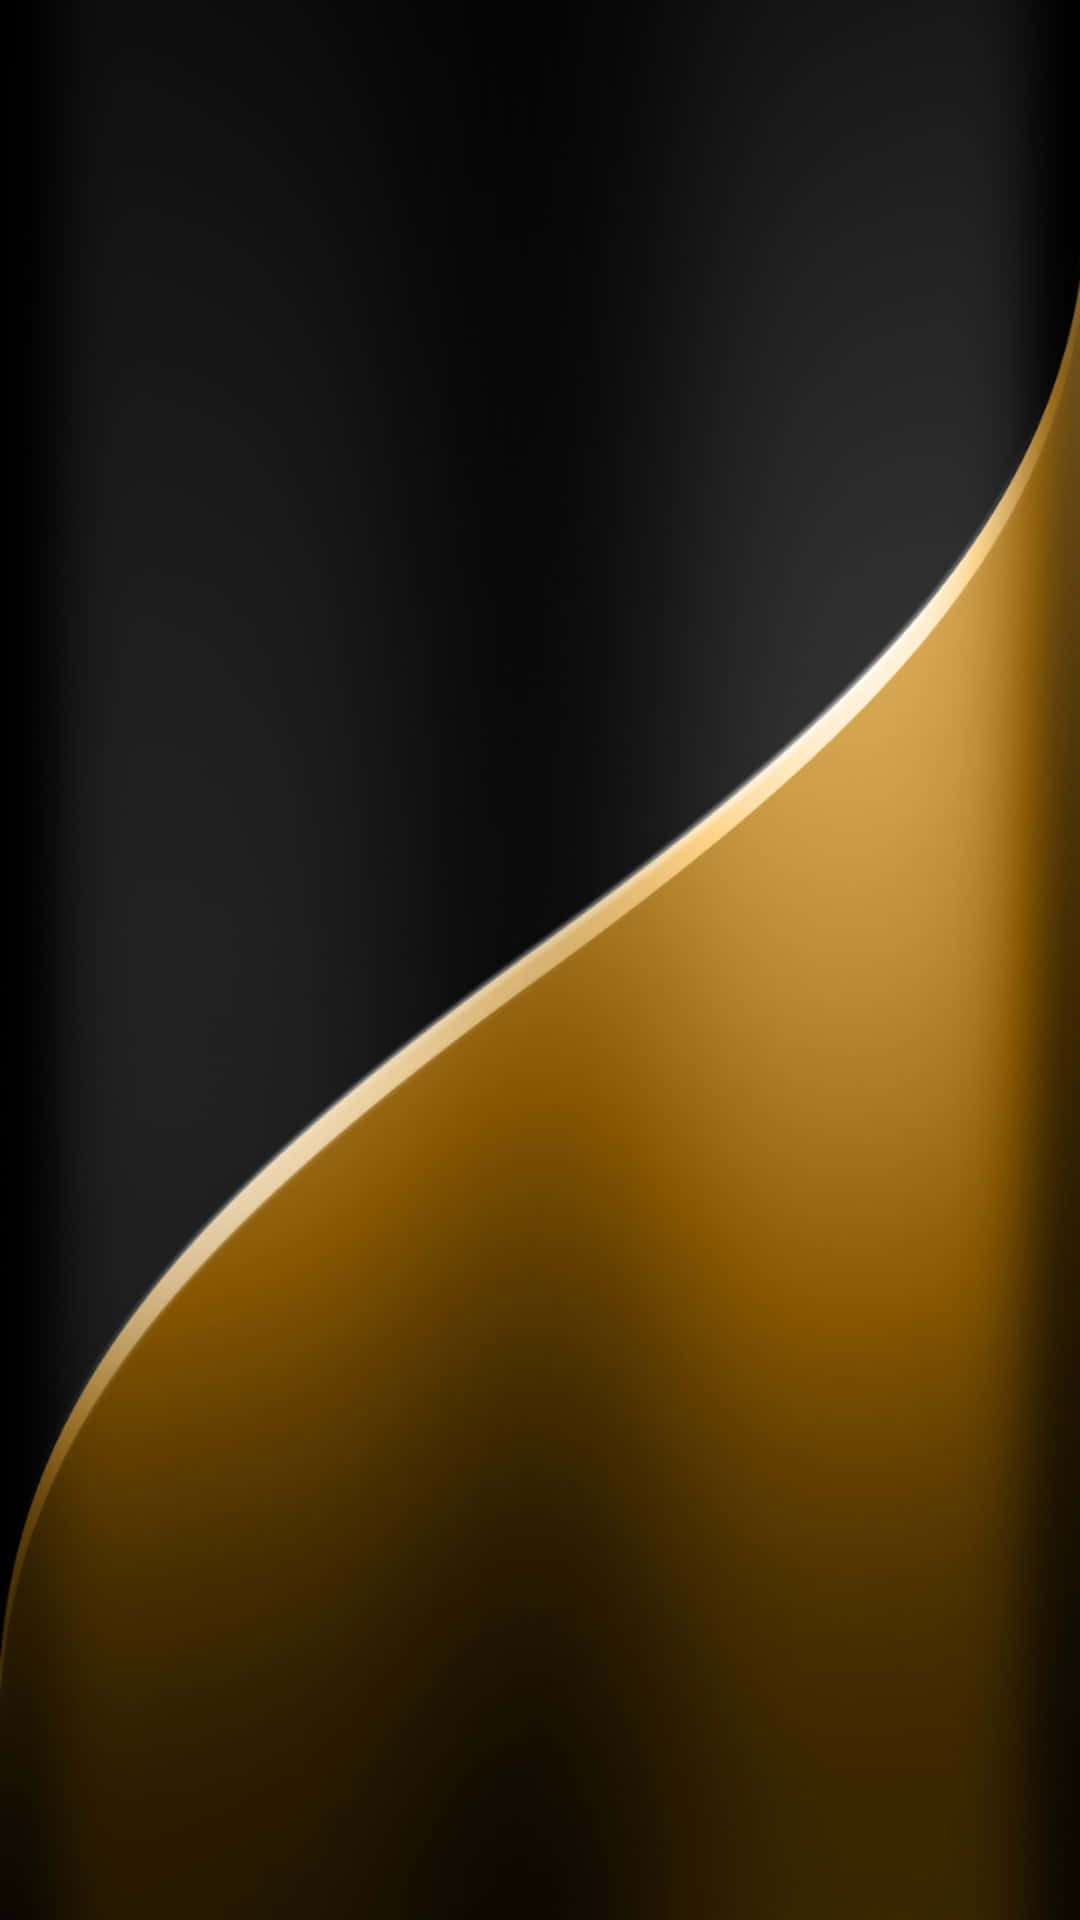 Rich, luxurious black and gold background.